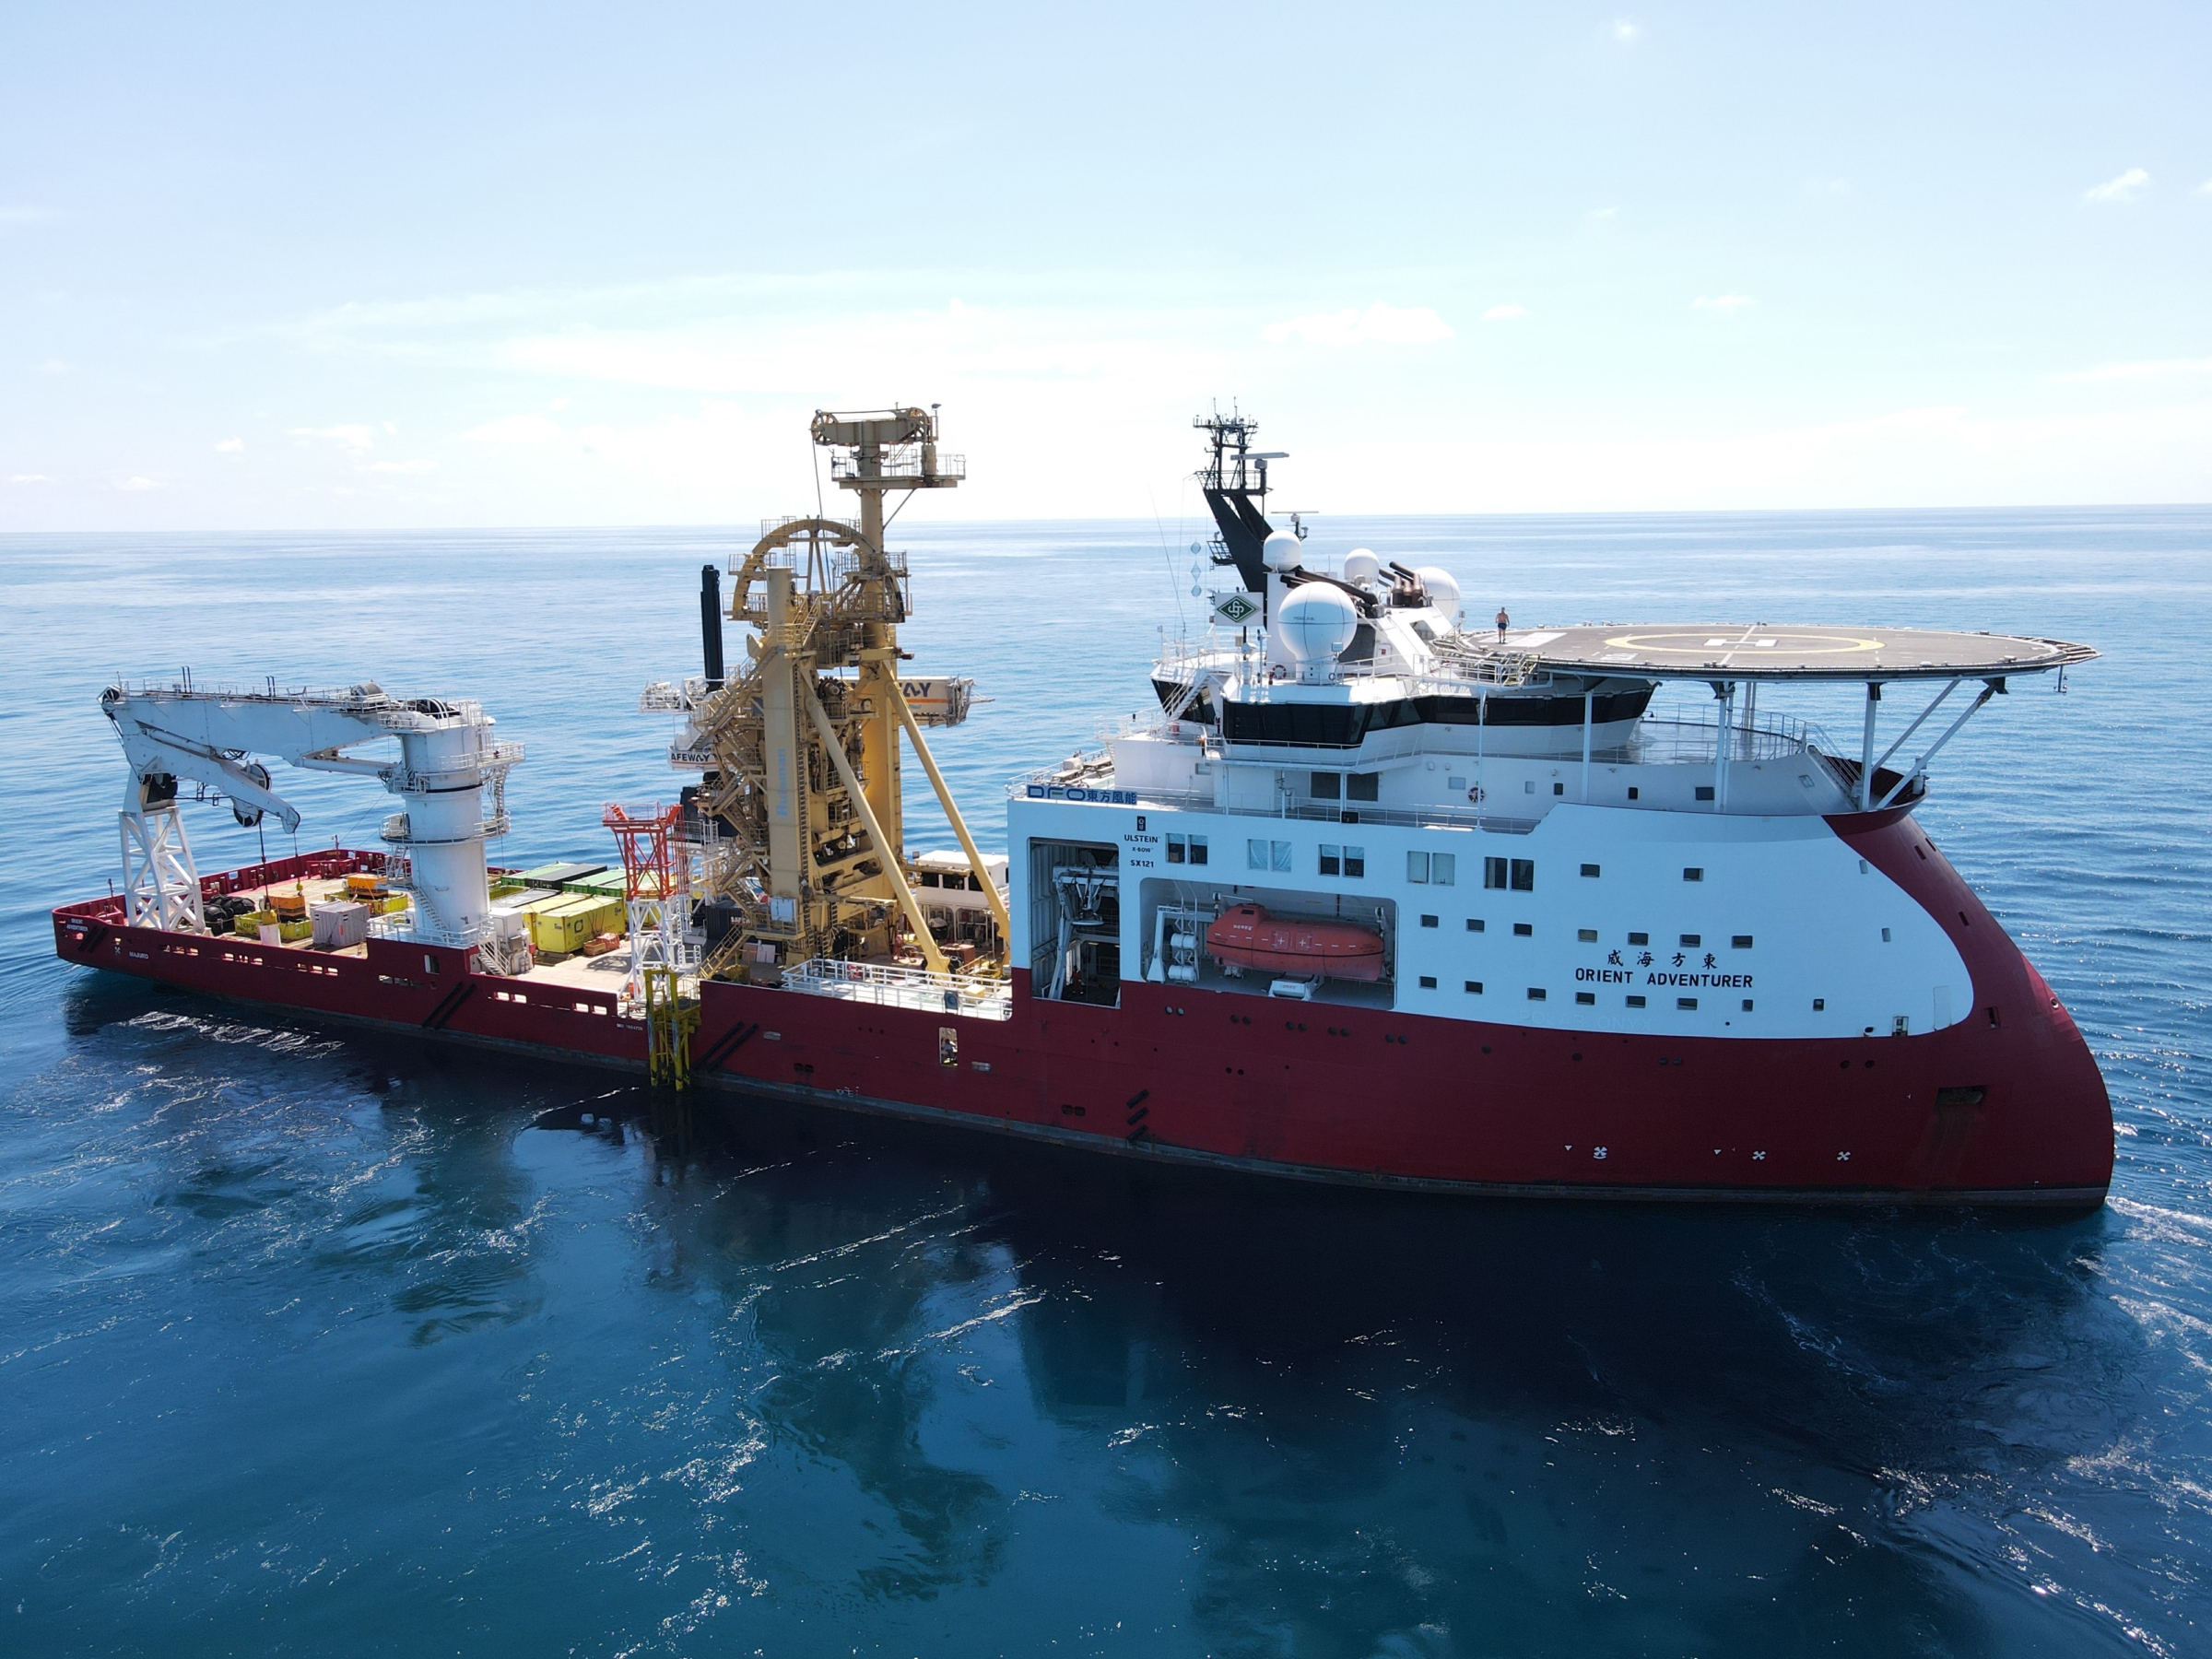 Huisman expands market position in cable-lay equipment wit LOI from DFO